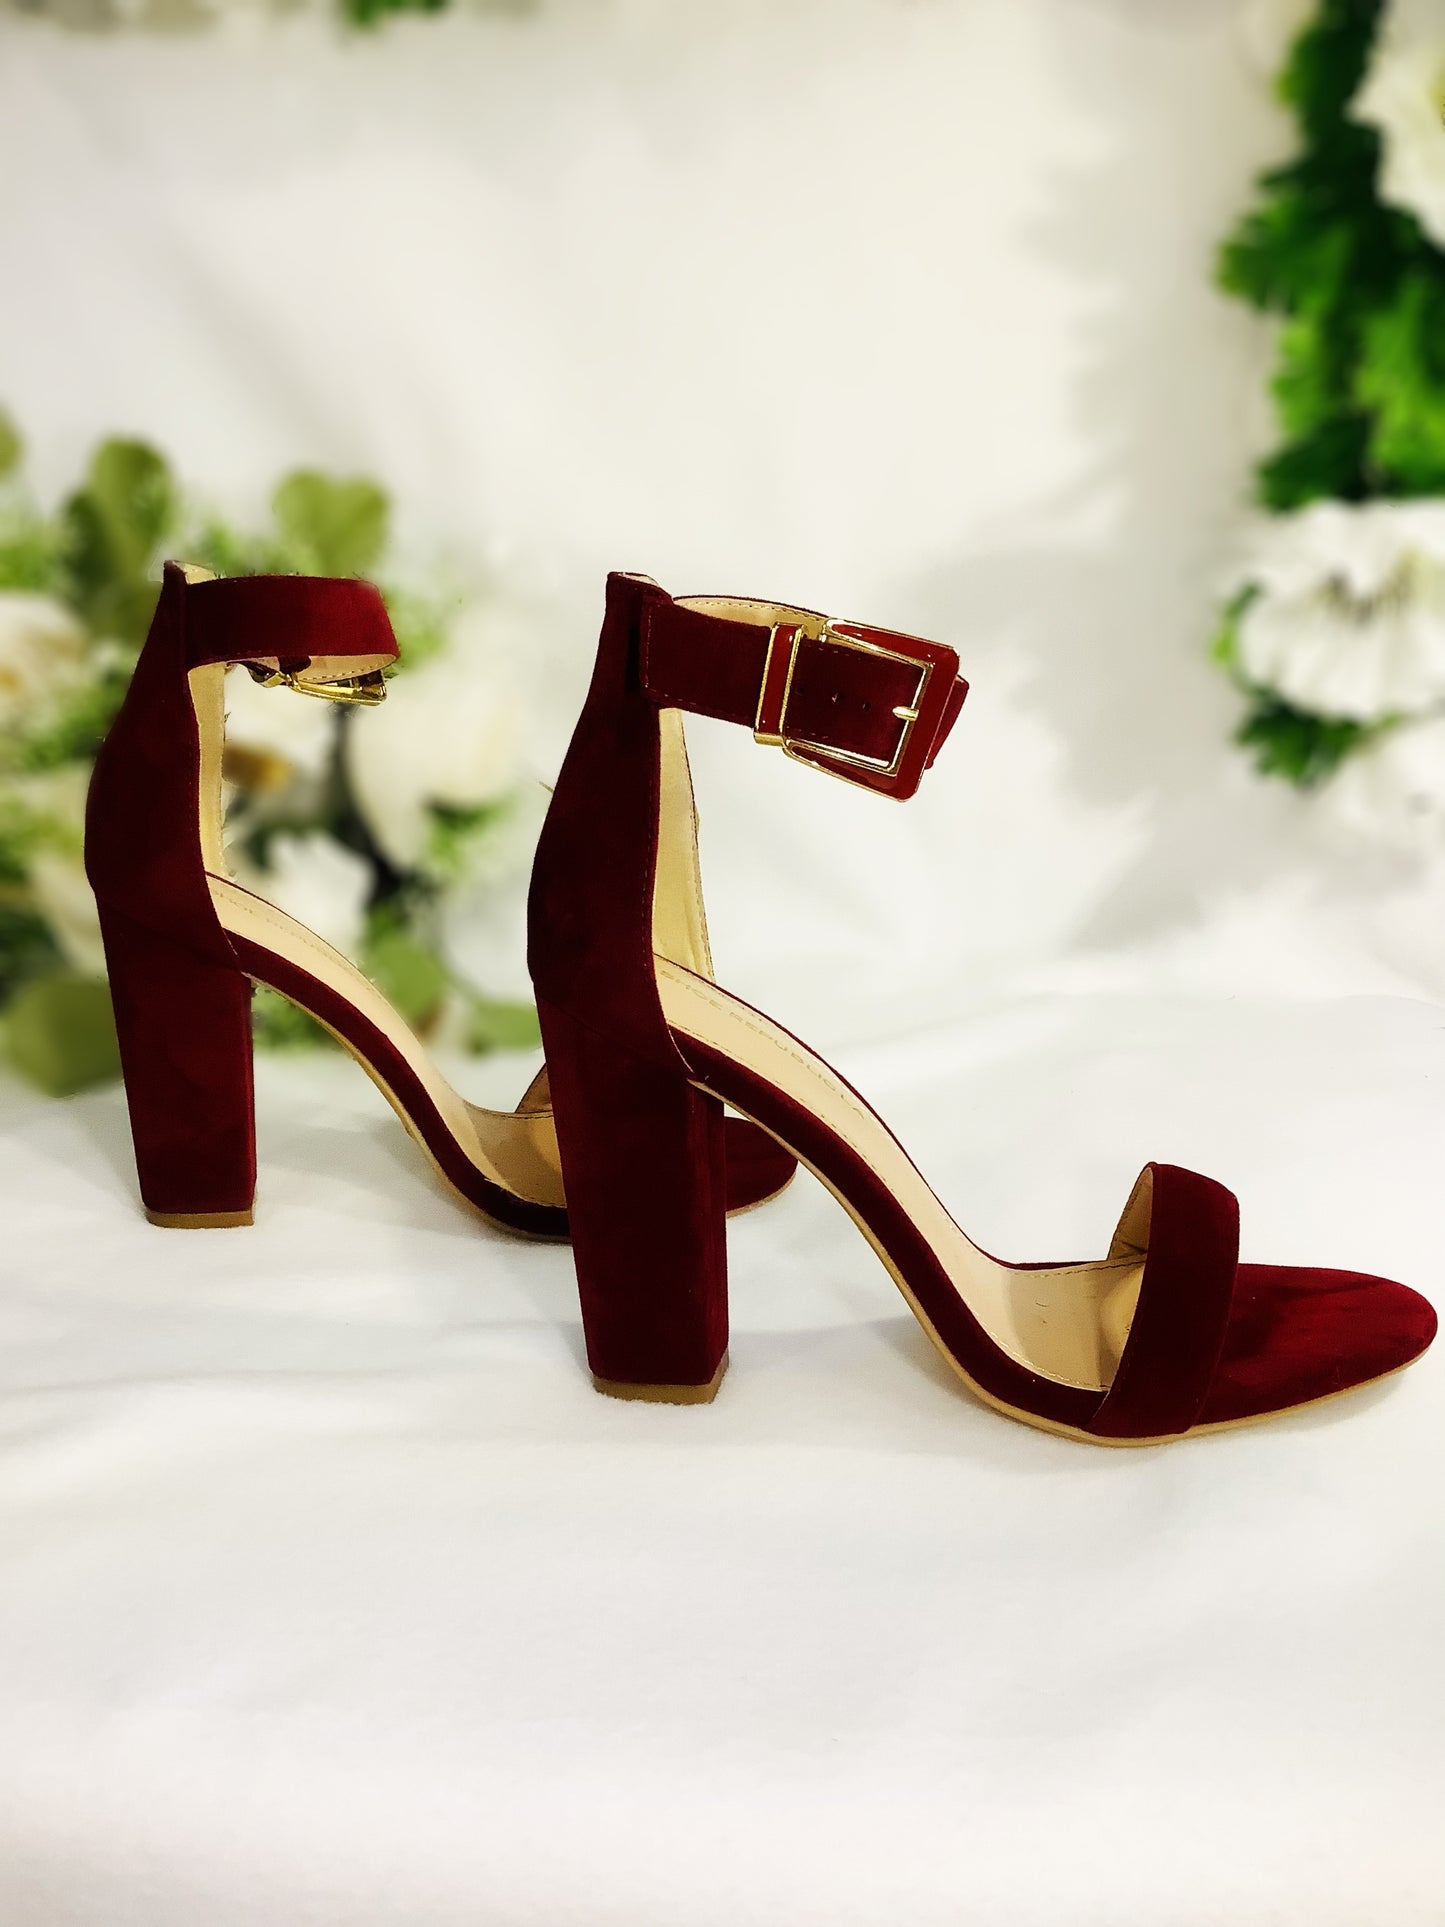 Blondish Salsa Red Sandal Heels for Women – From Shoes To Glam